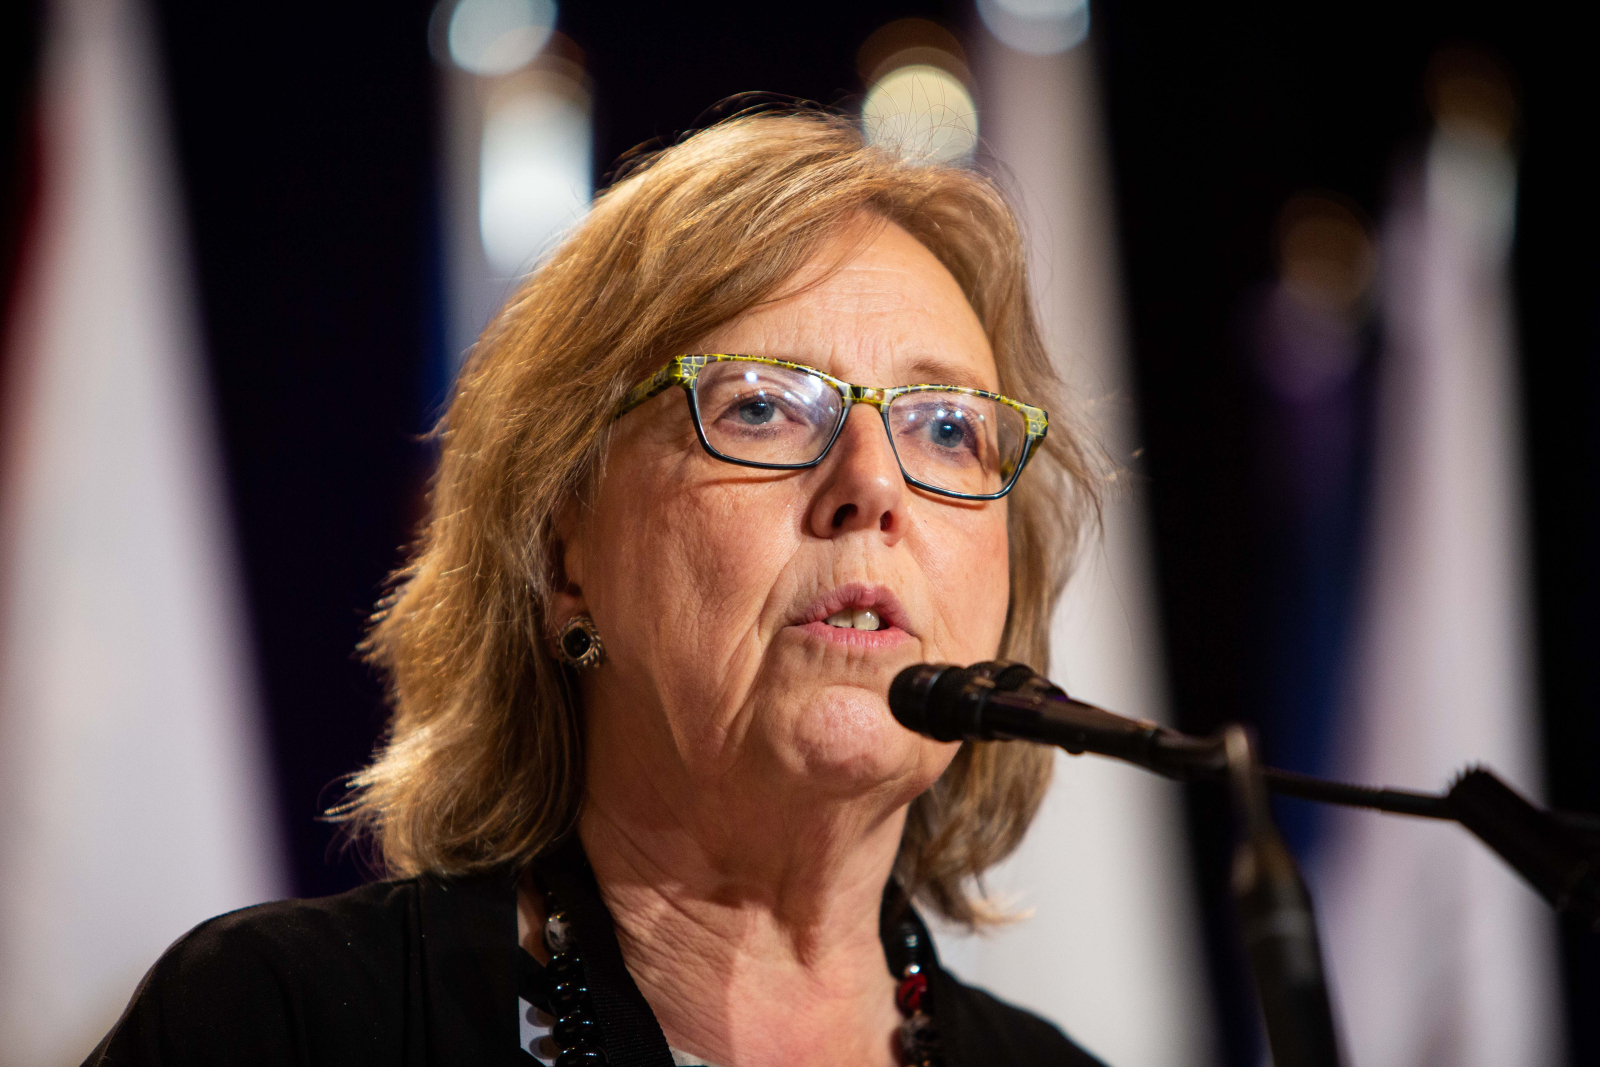 close up of a woman wearing glasses speaking into a microphone